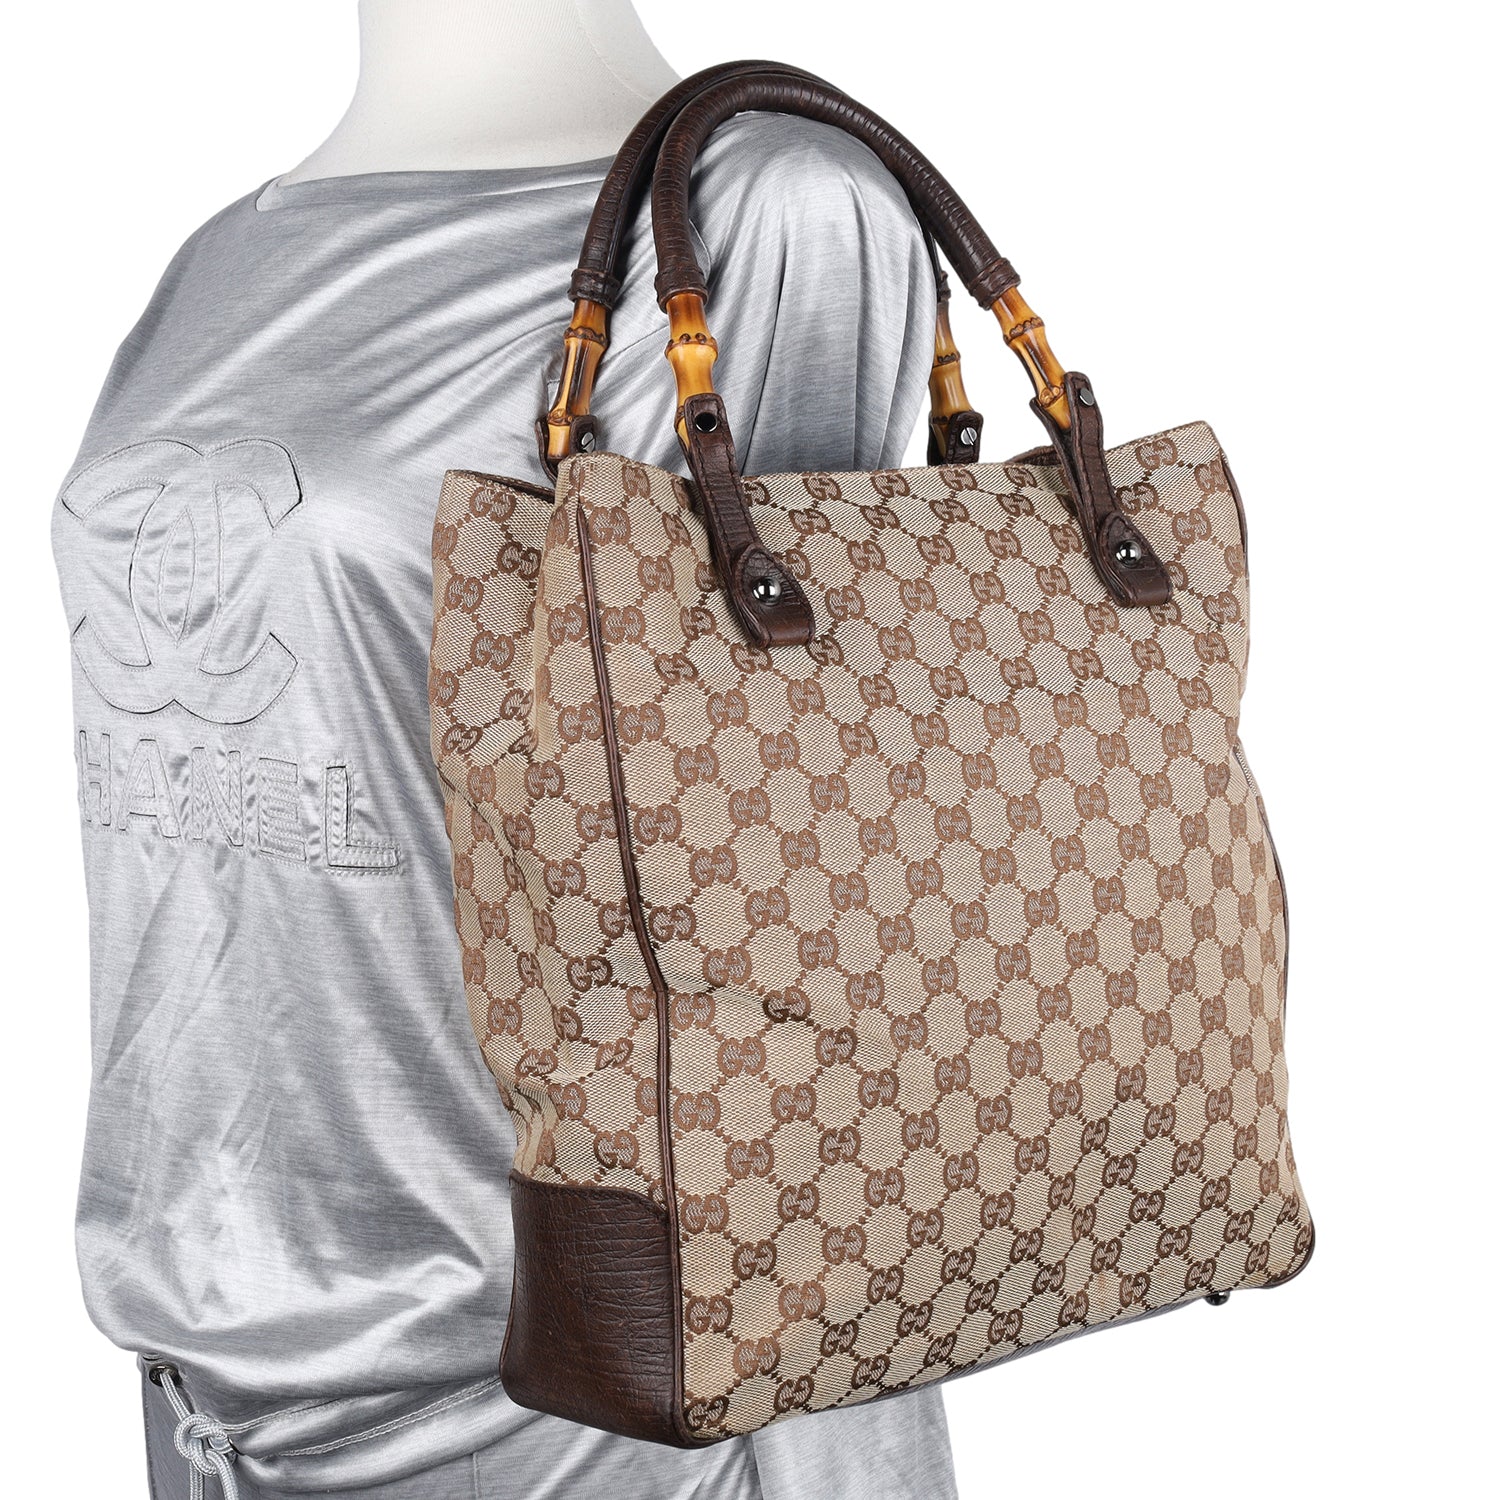 GUCCI Bamboo Bar GG Canvas Tote Bag Beige 232947-US